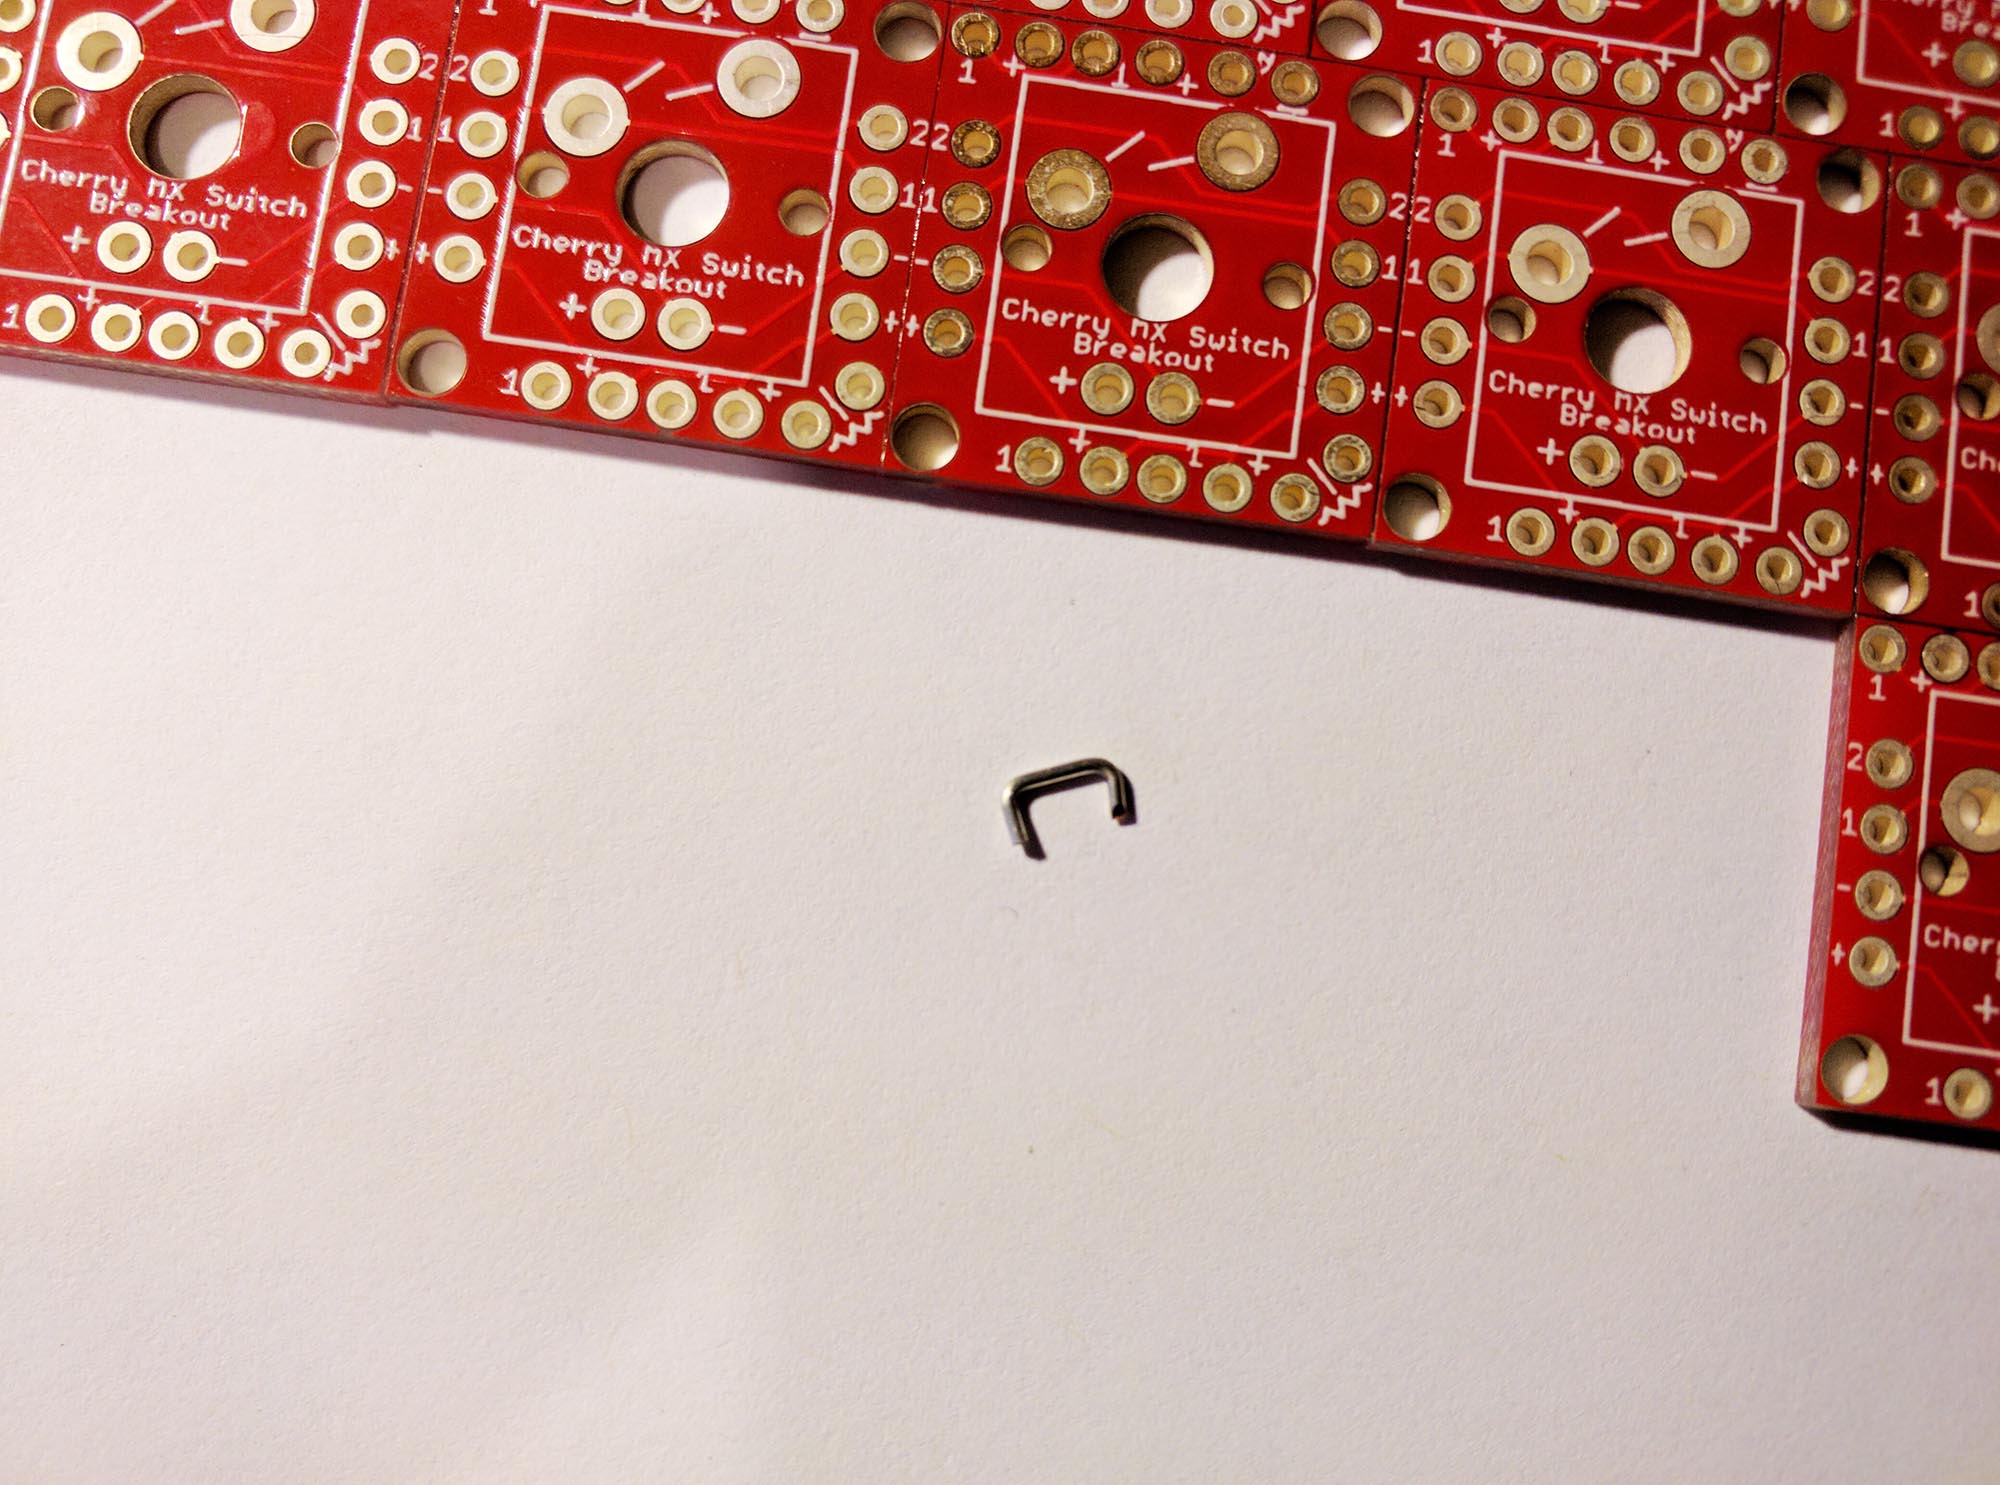 Tiny pieces of wire used to connect each individual PCB electrically